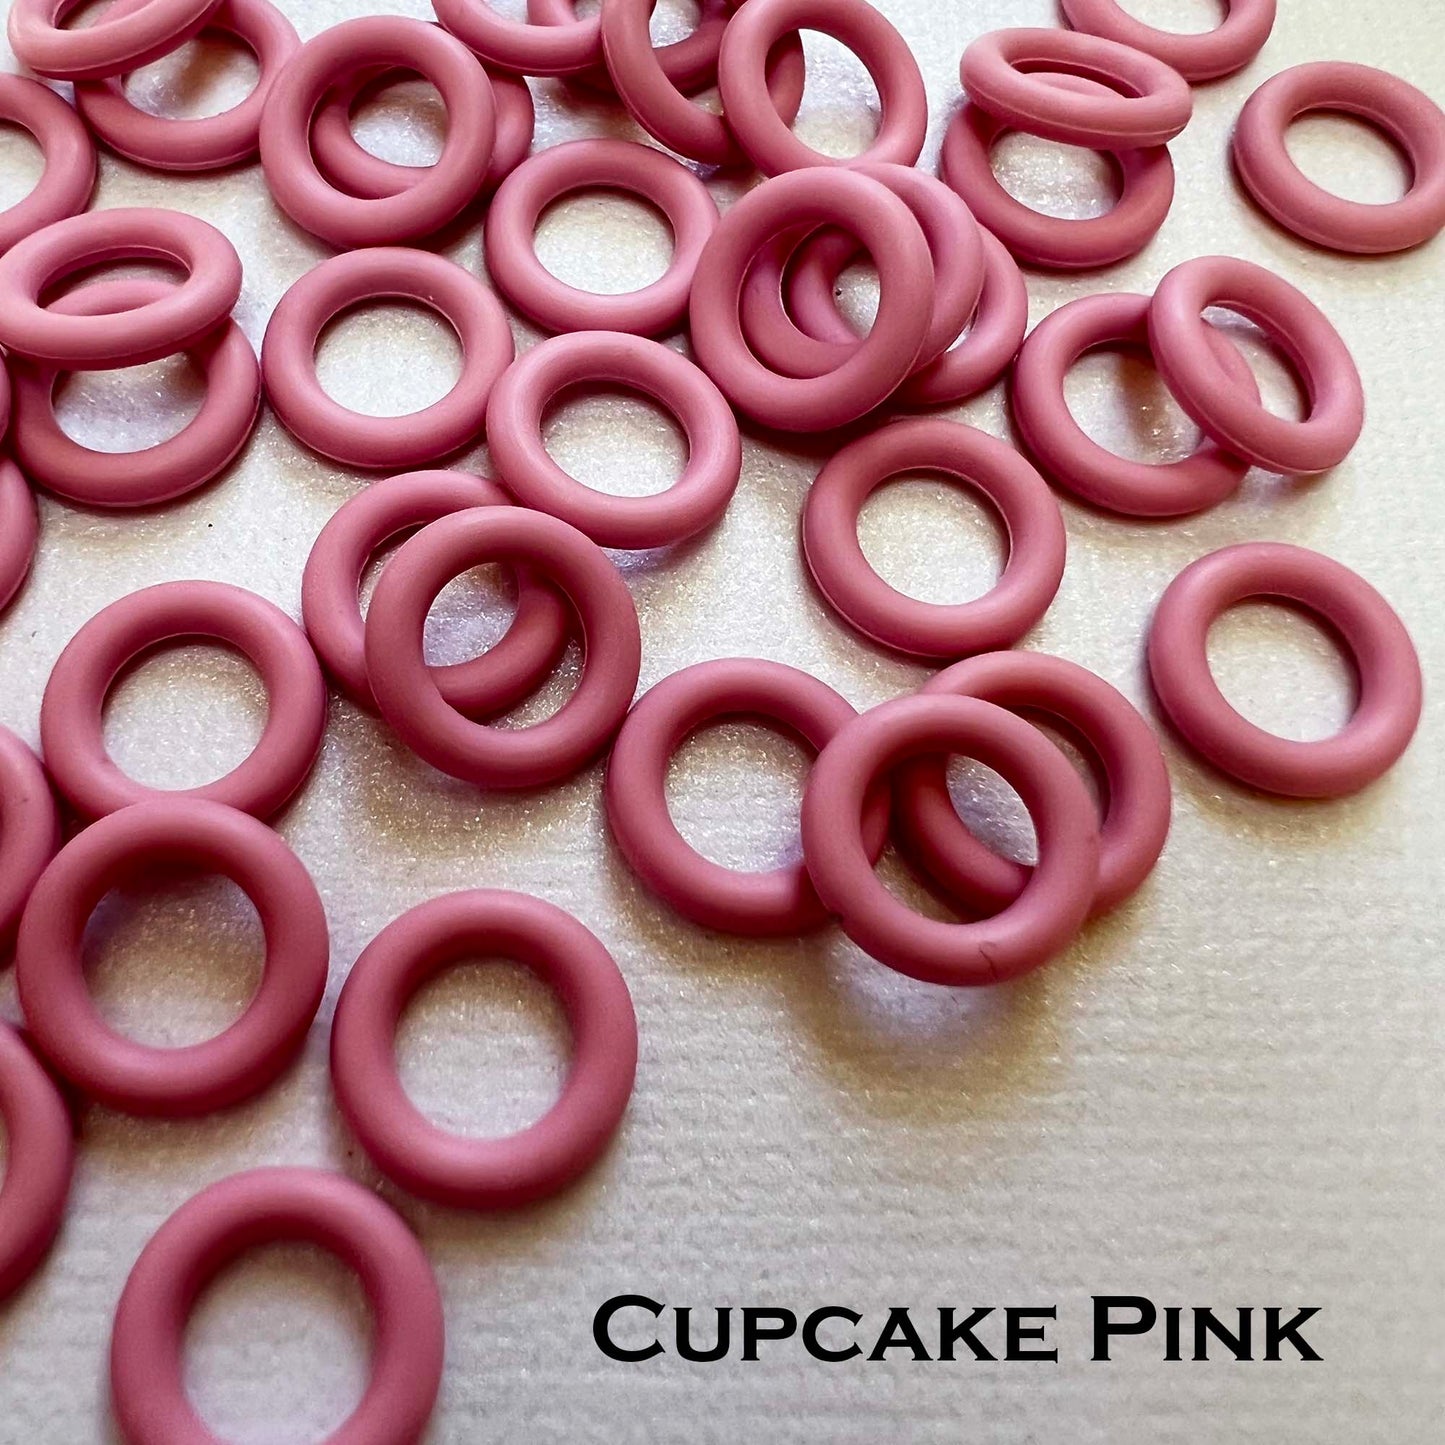 10mm Rubber O-Rings (ID: 6mm) - choose color & quantity